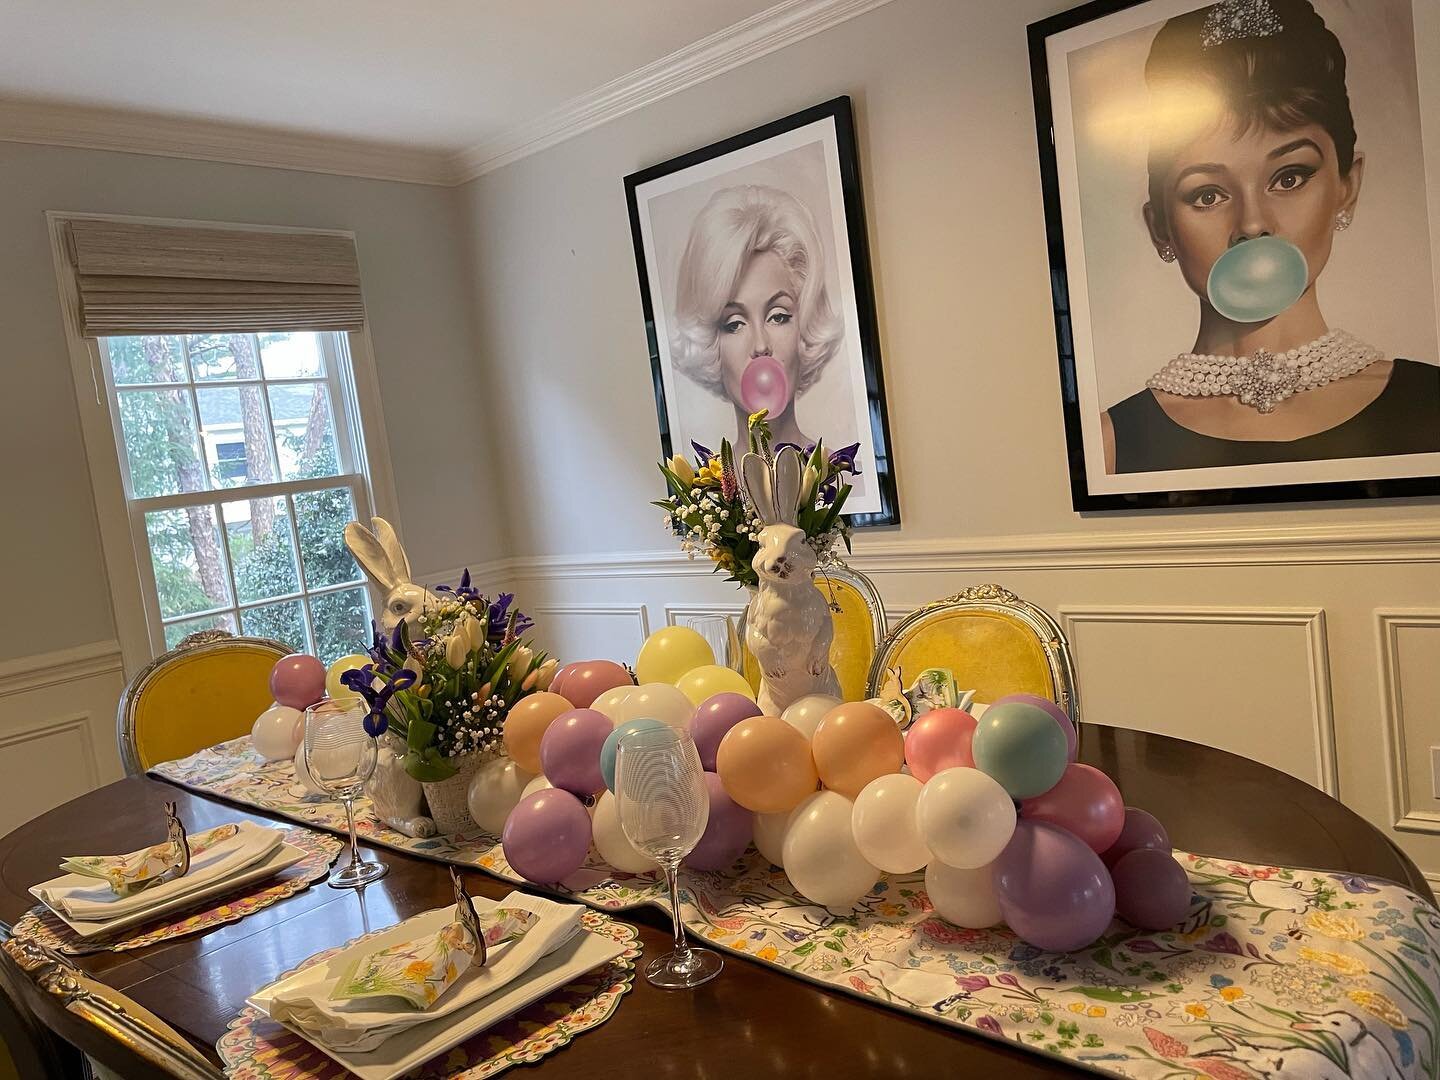 The Easter bunny 🐰 came early here&hellip;since we are obsessed with balloons 🎈 these days we thought why not do a balloon table runner for Easter brunch?! 

DM me to order your Easter table balloon garland @inflatectny 

#inflatelouisville #inflat